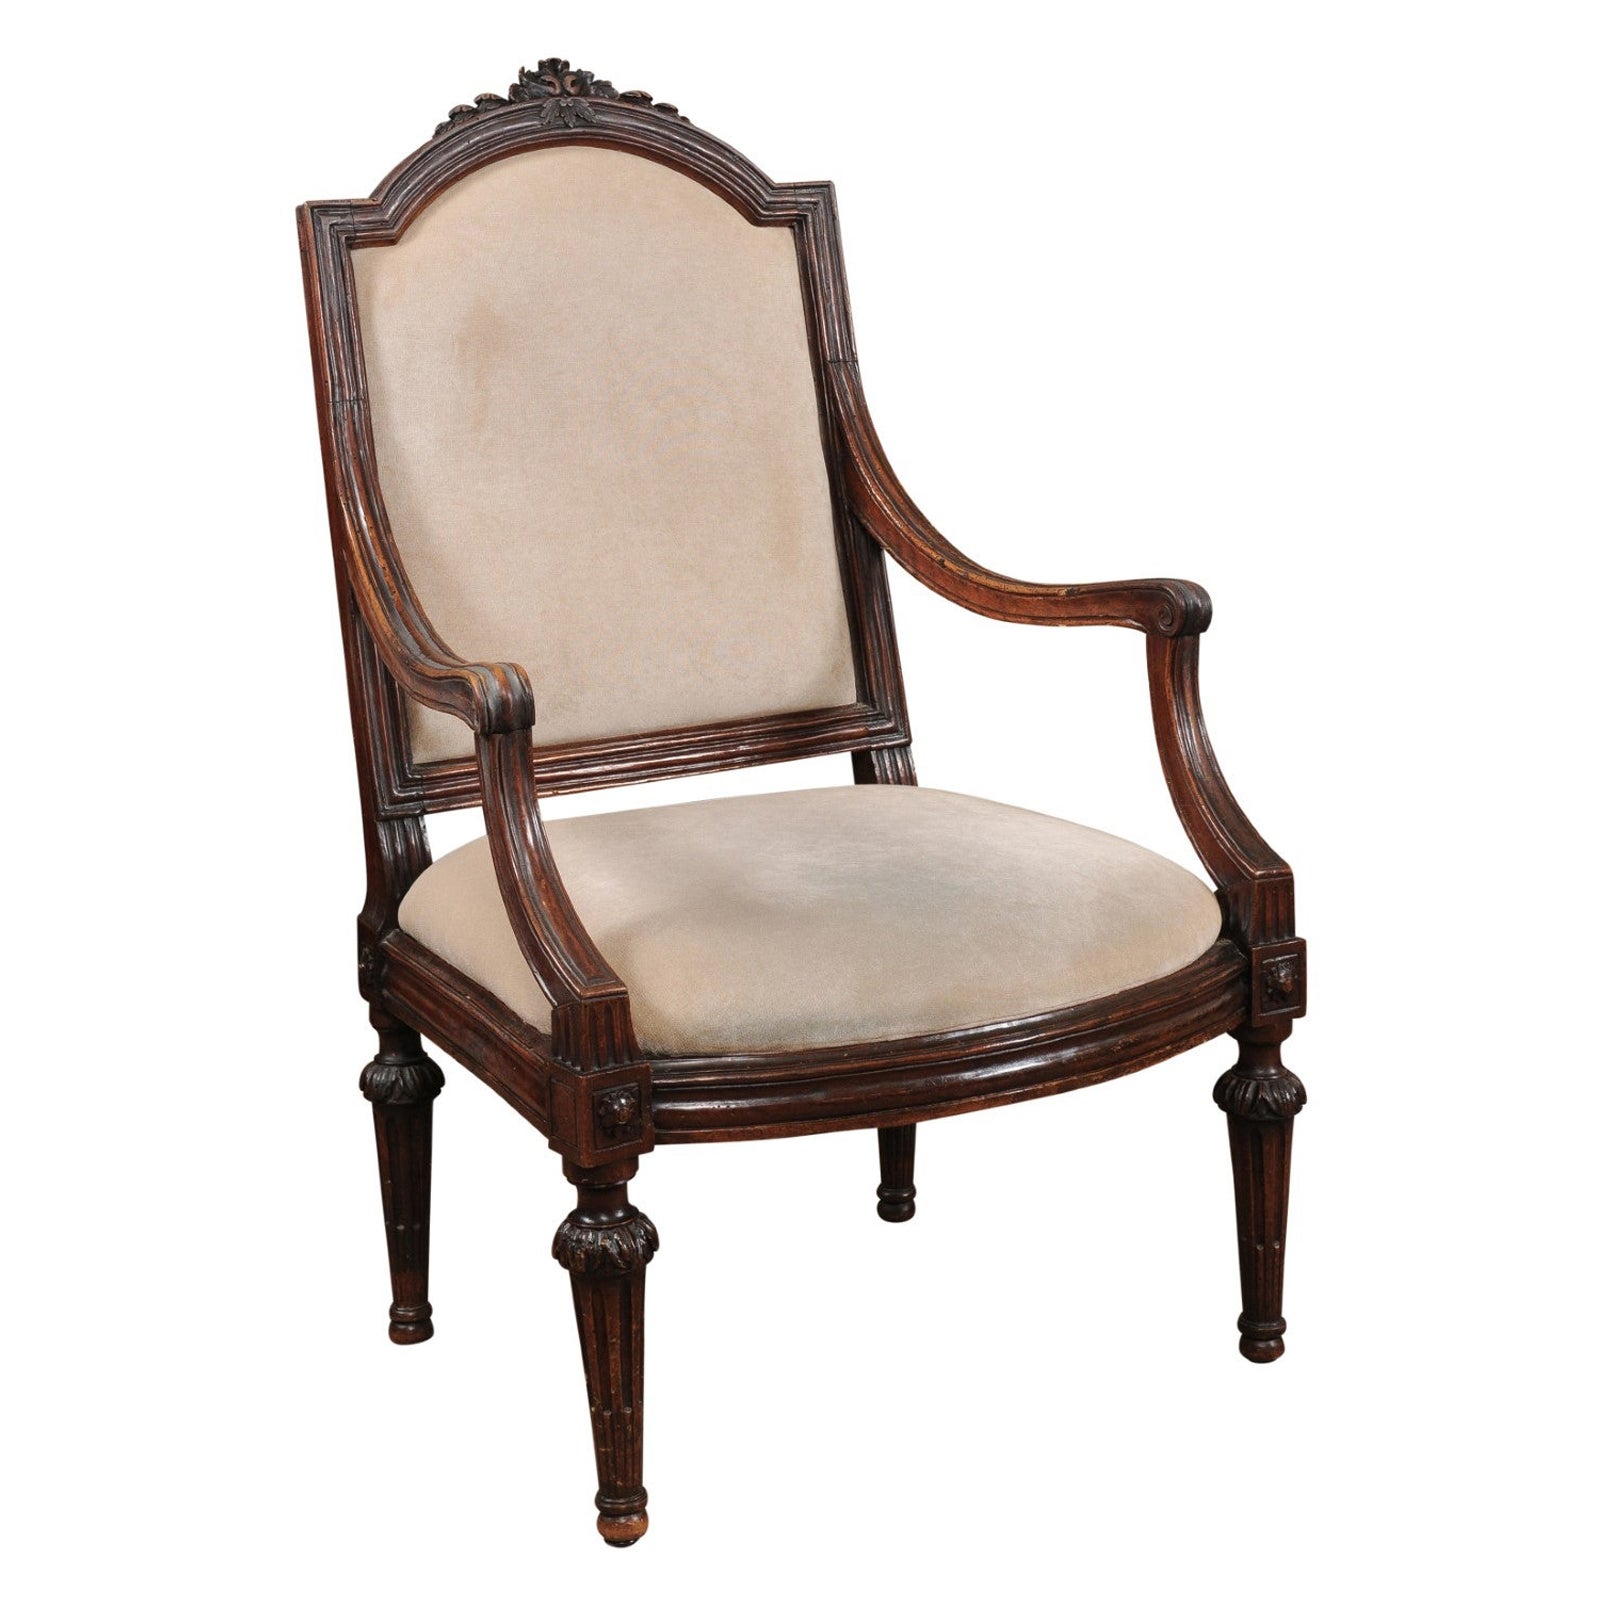 Neoclassical Period Walnut Armchair with Fluted Tapering Legs, Italy, ca. 1790